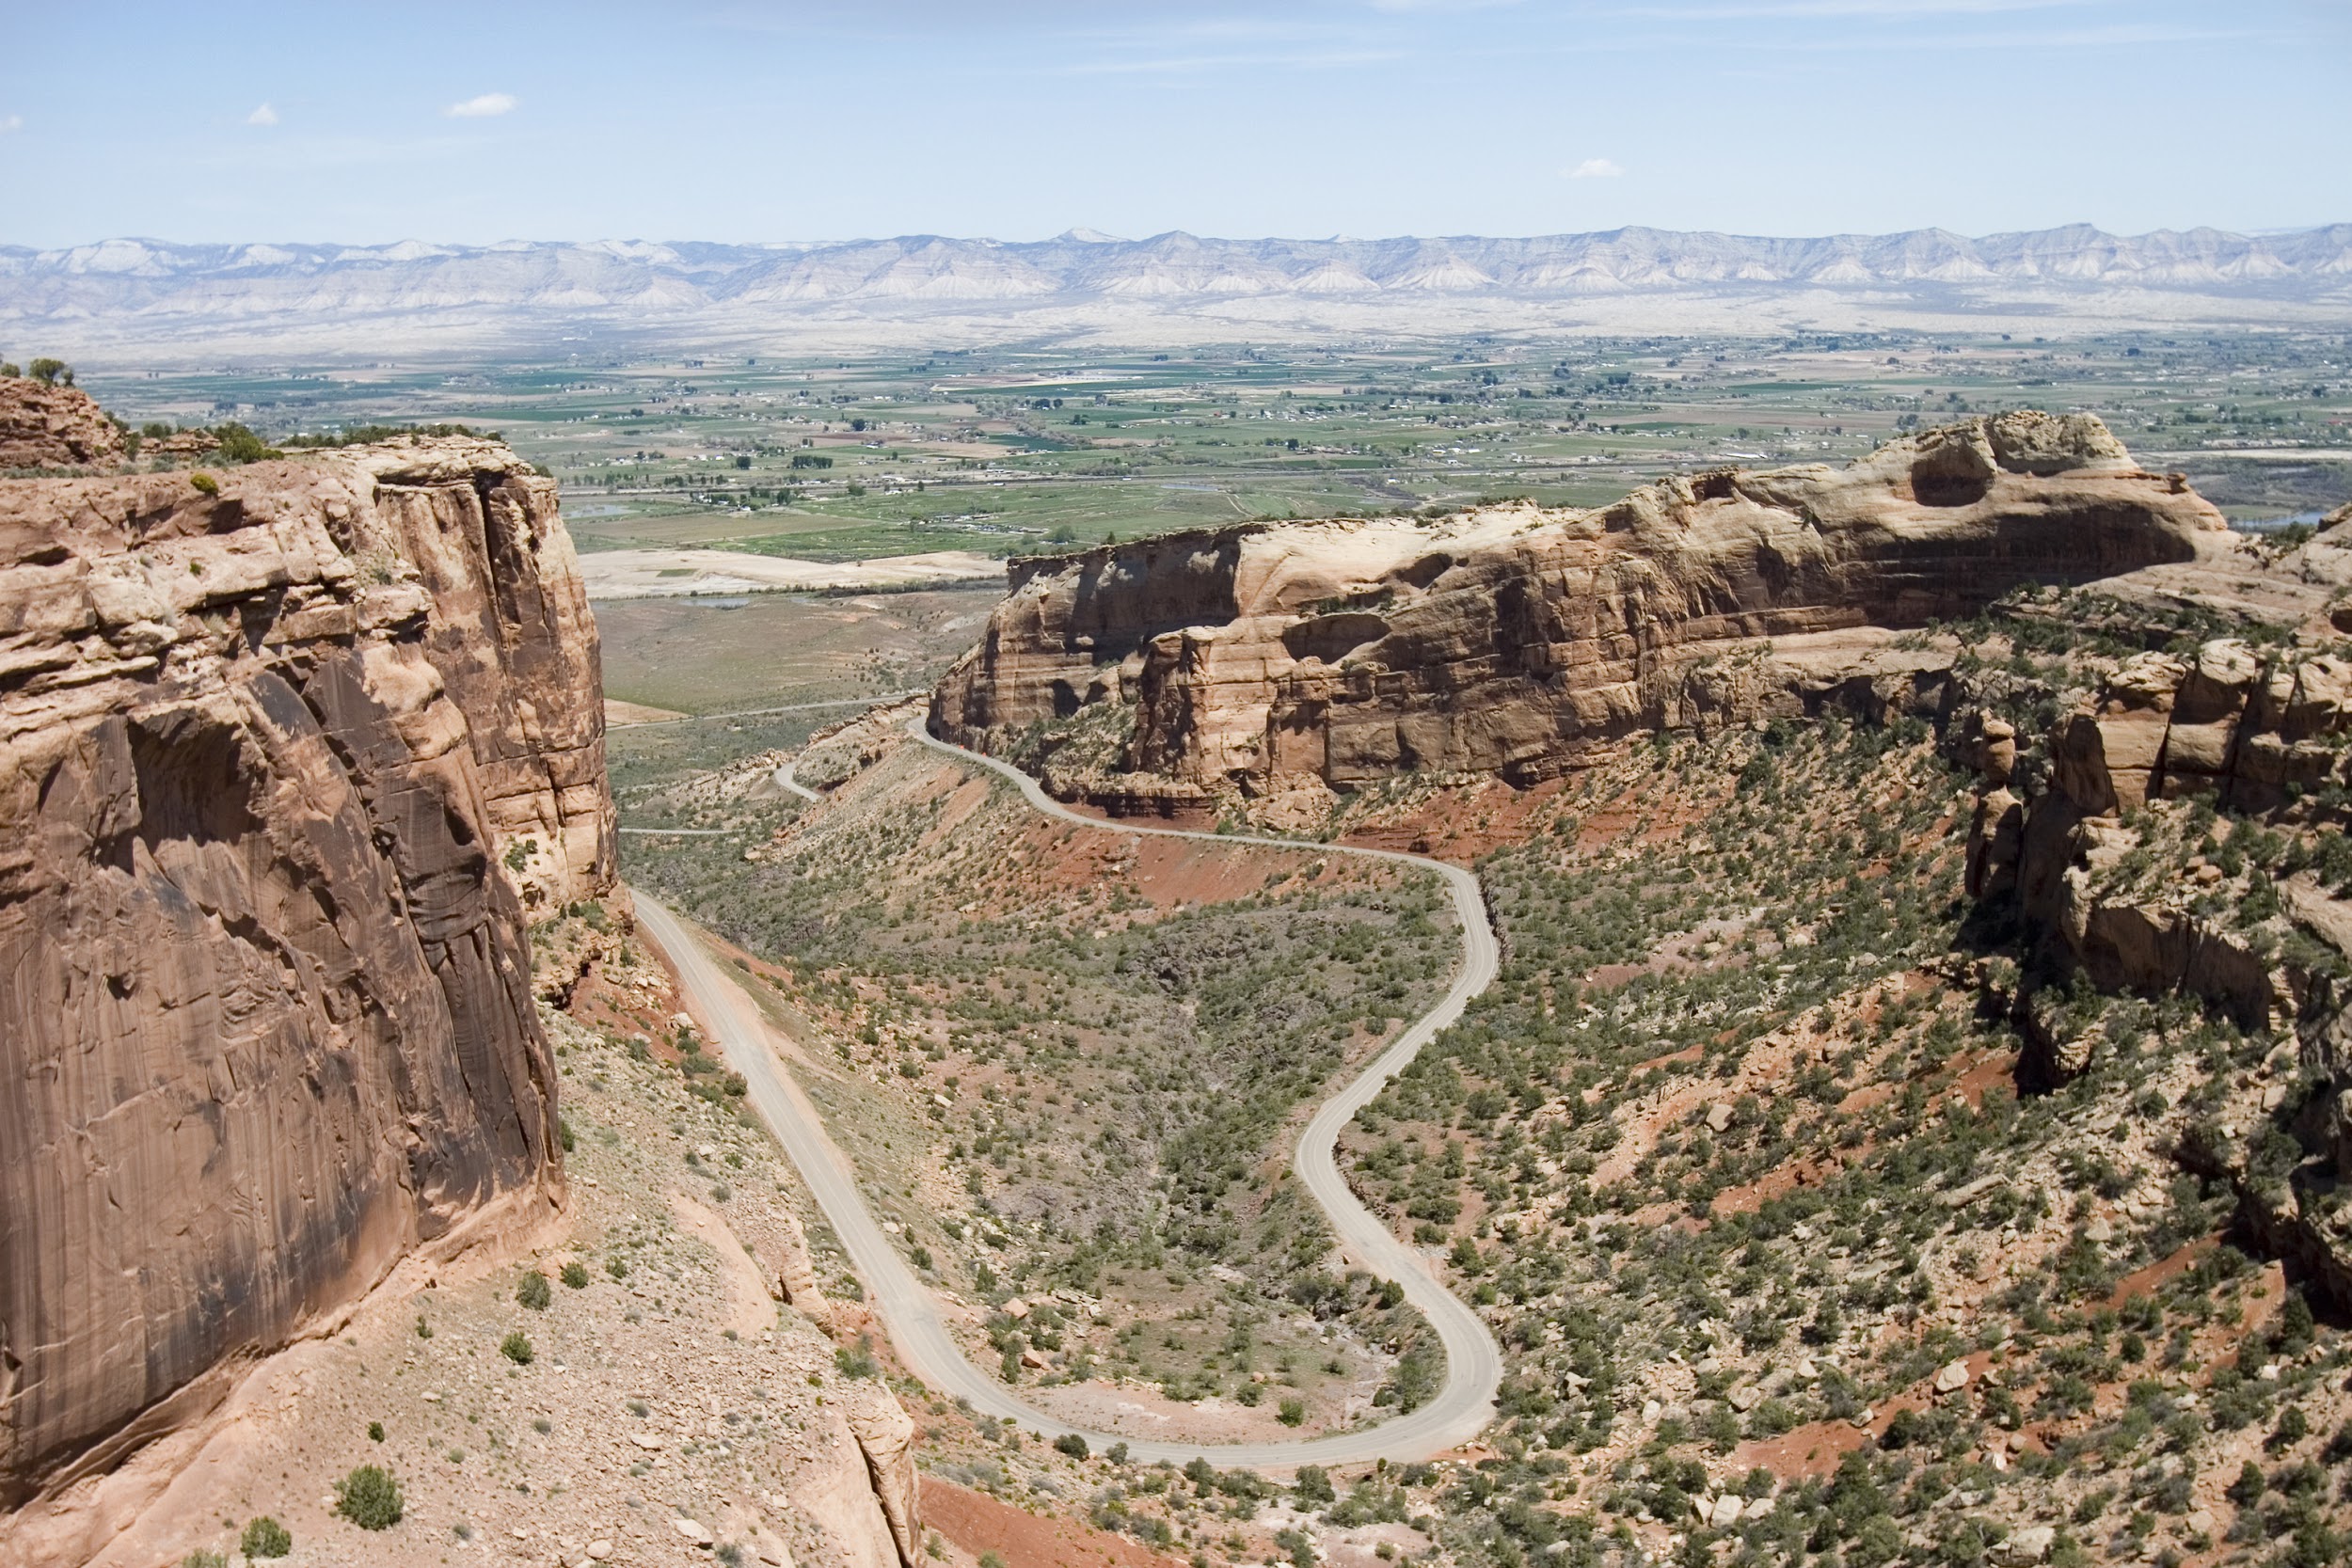 This image shows part of the Grand Mesa and part of Colorado National Monument